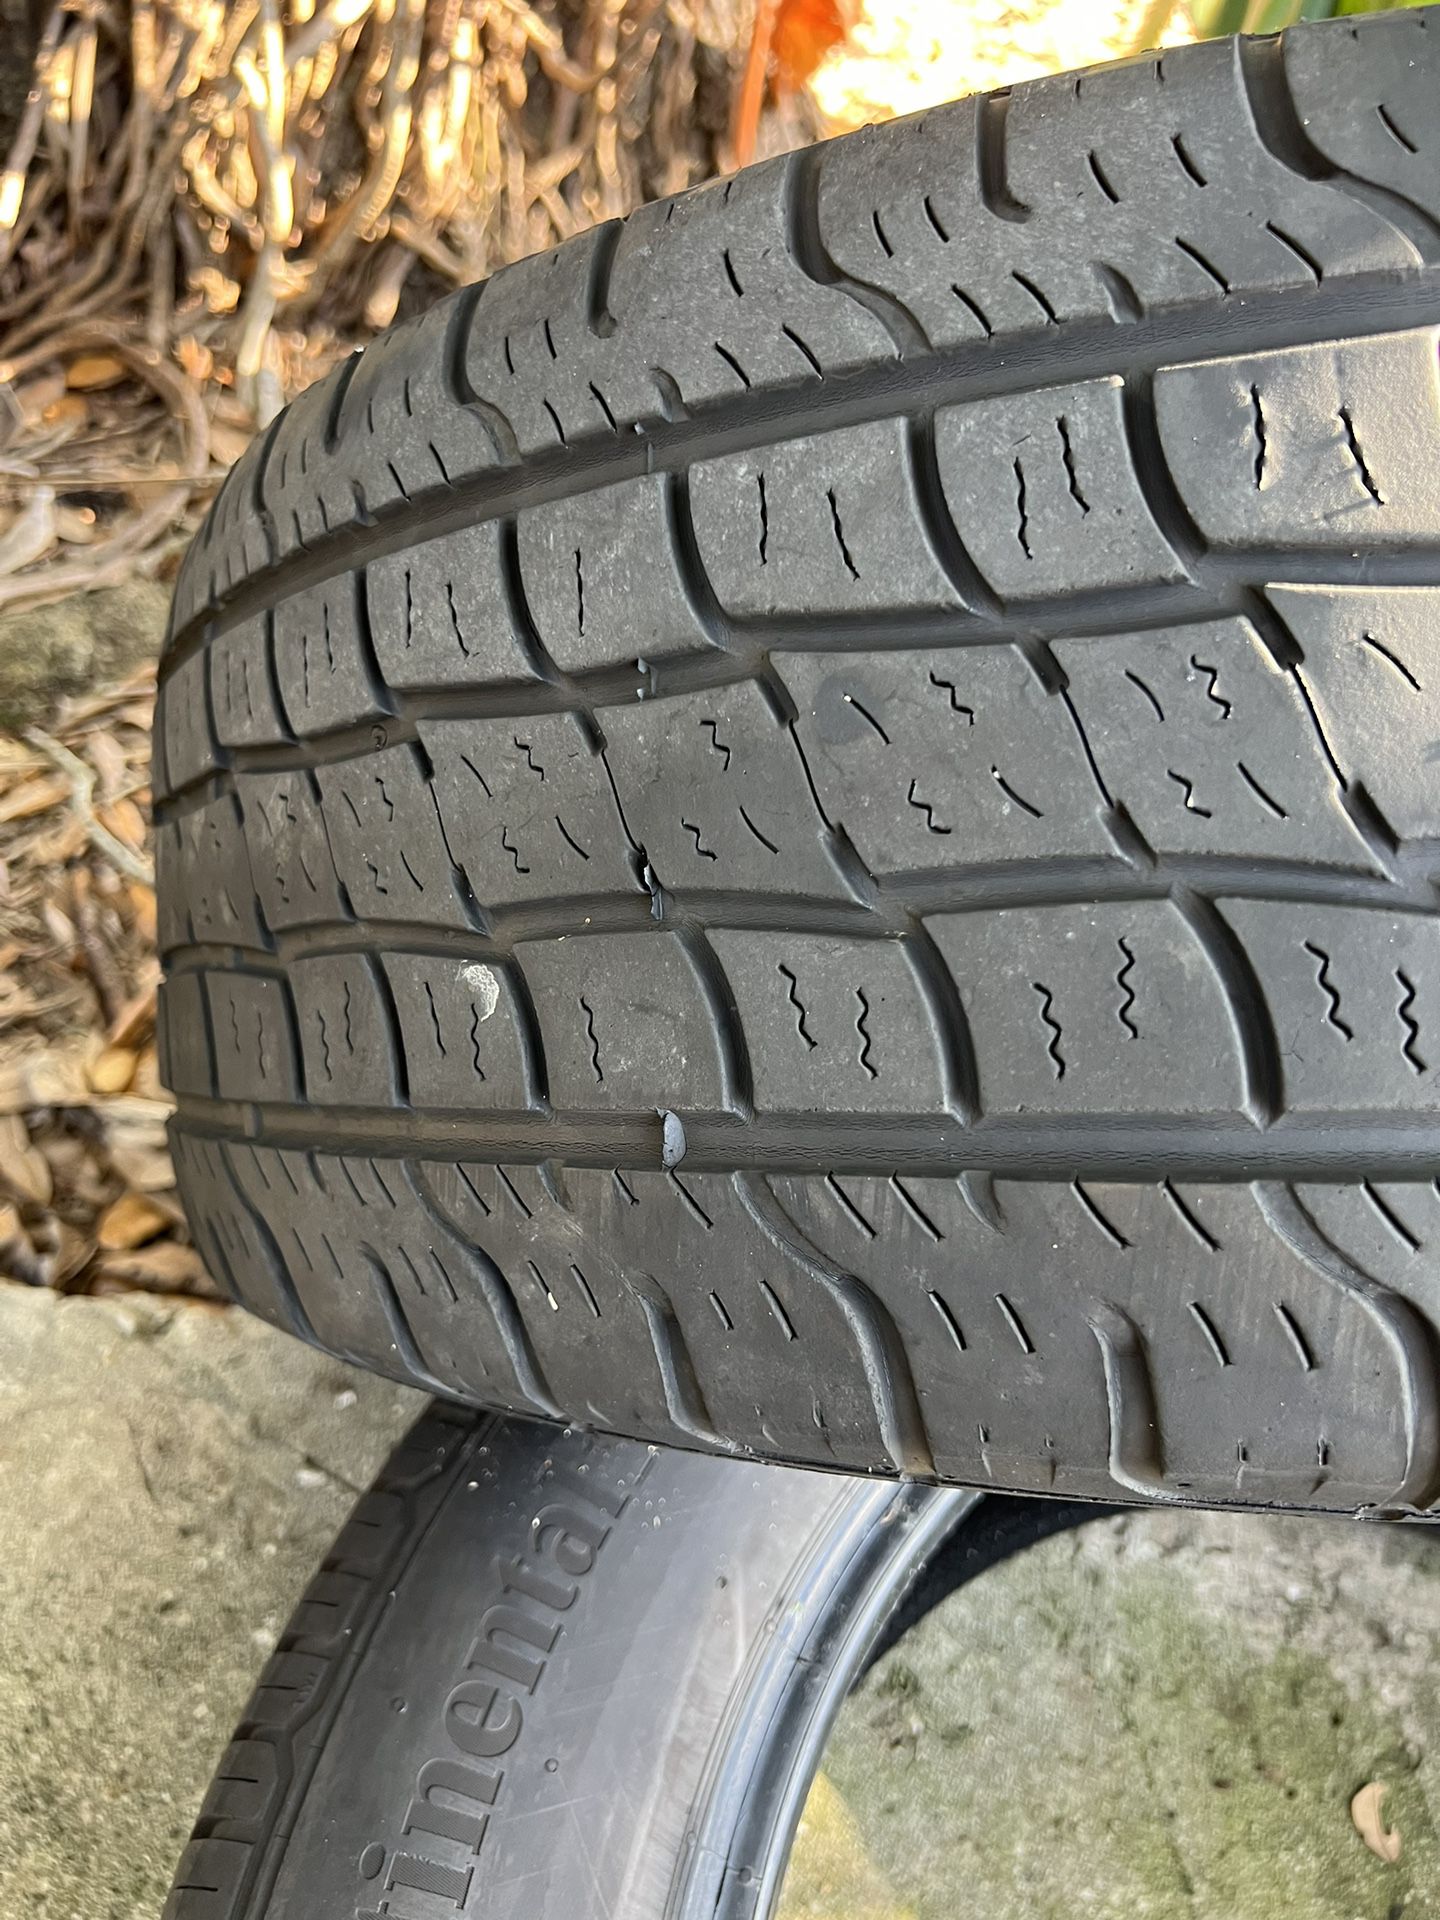 2 Tires 235/60/18 Tires Continental $80 